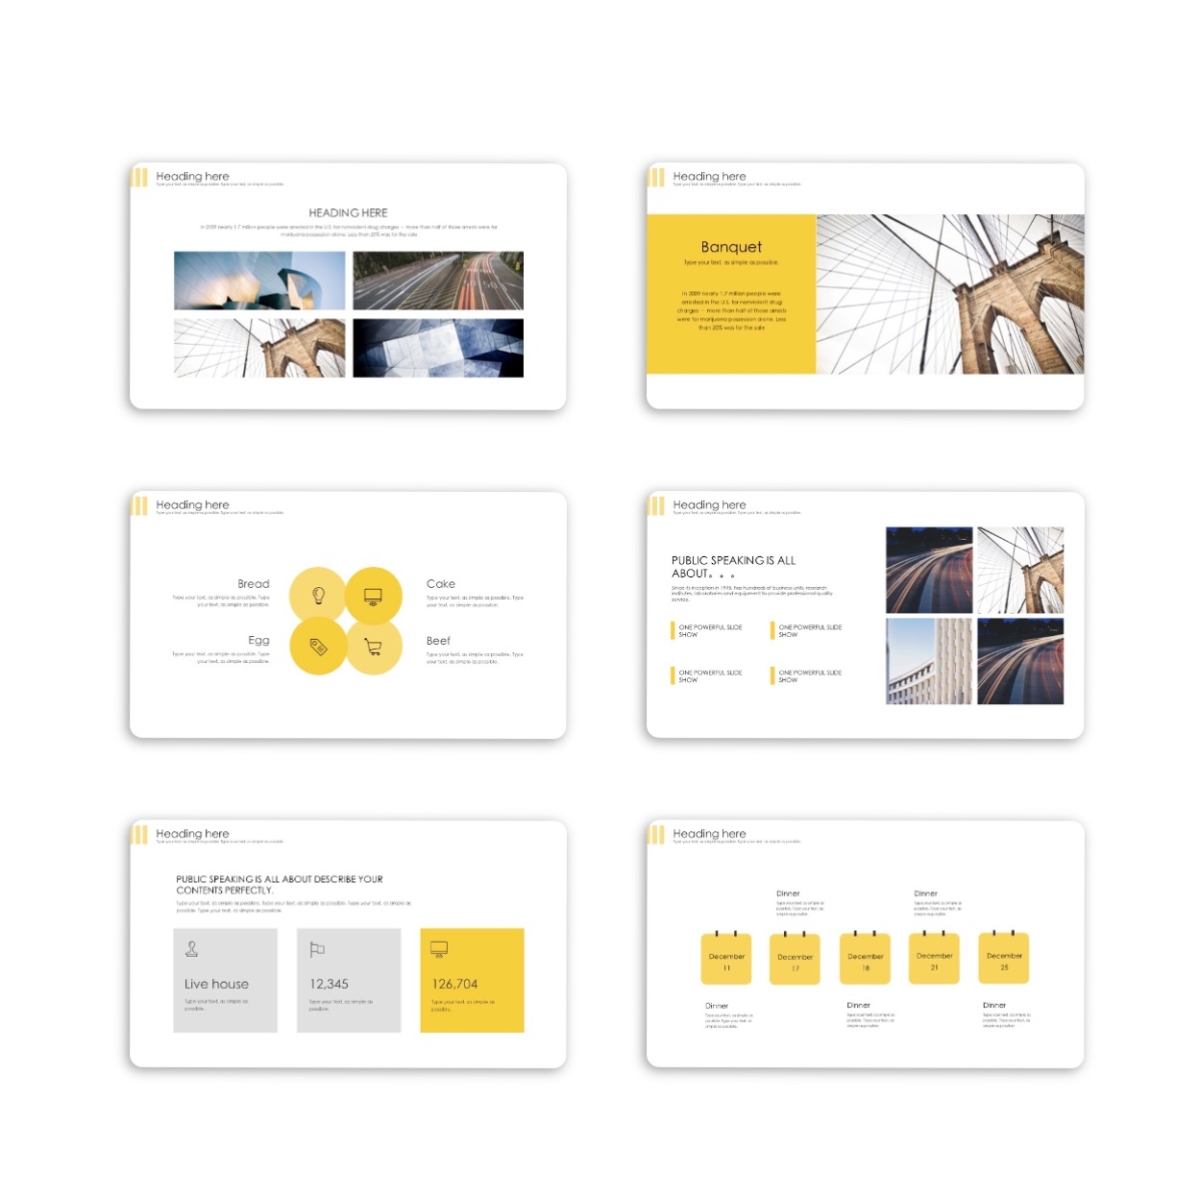 Cool Business Company Introduction PowerPoint Template